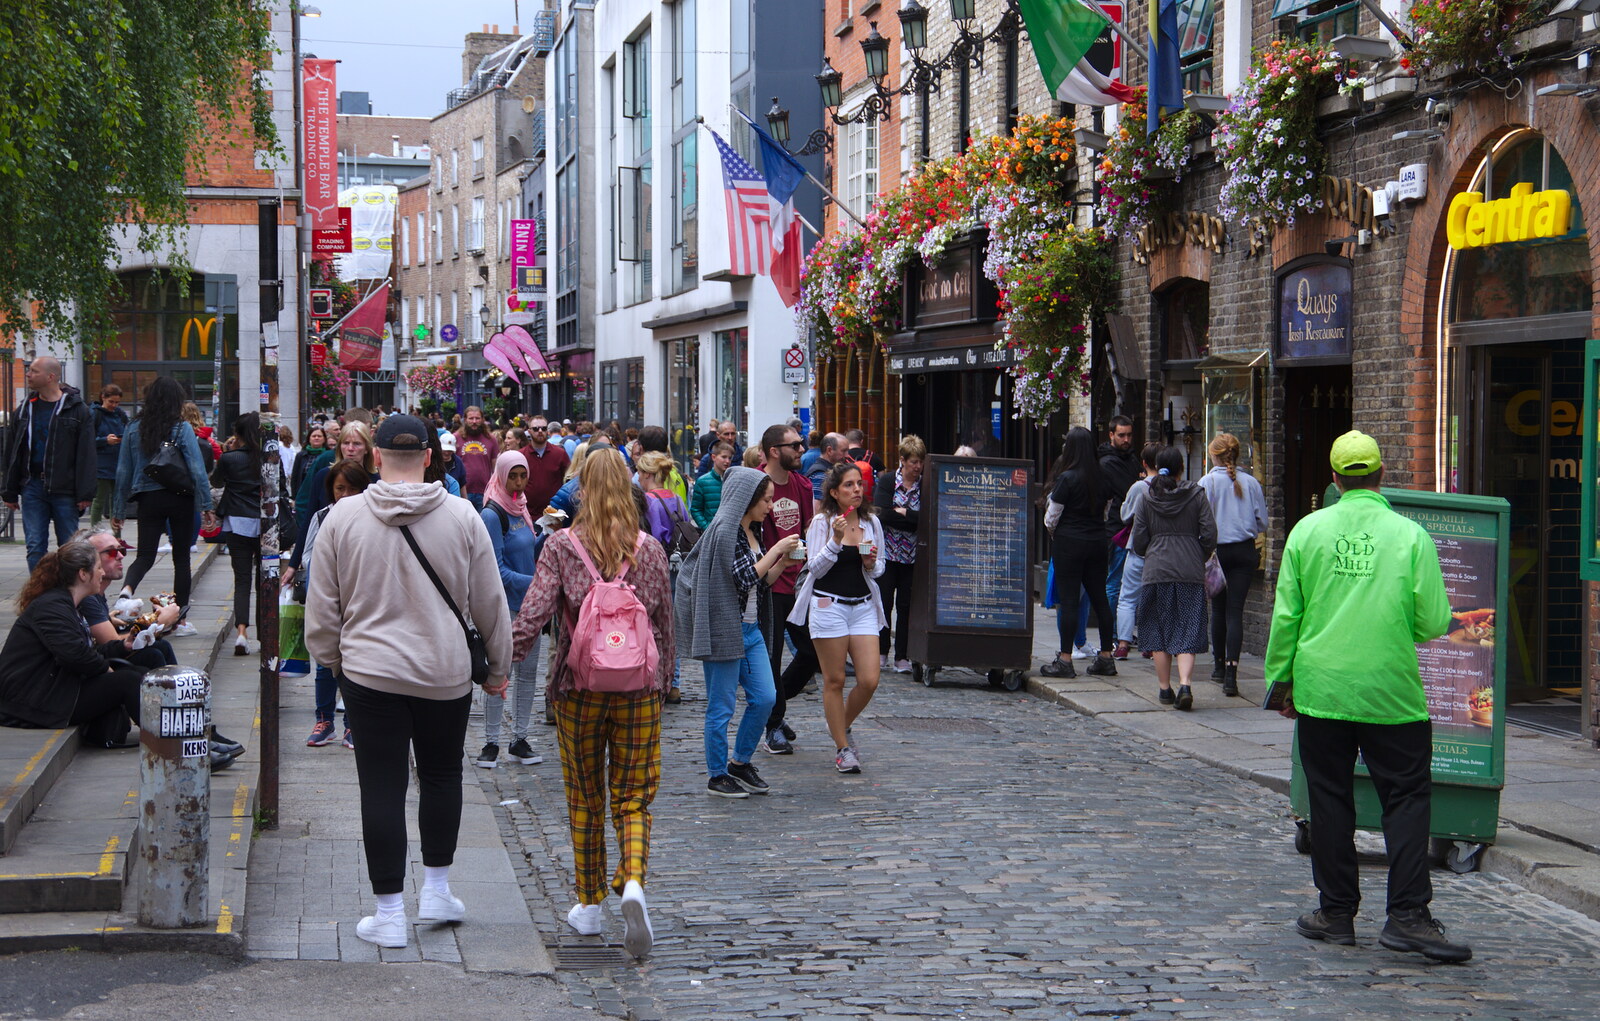 The tourist crowds in Temple Bar from Busking in Temple Bar, Dublin, Ireland - 12th August 2019